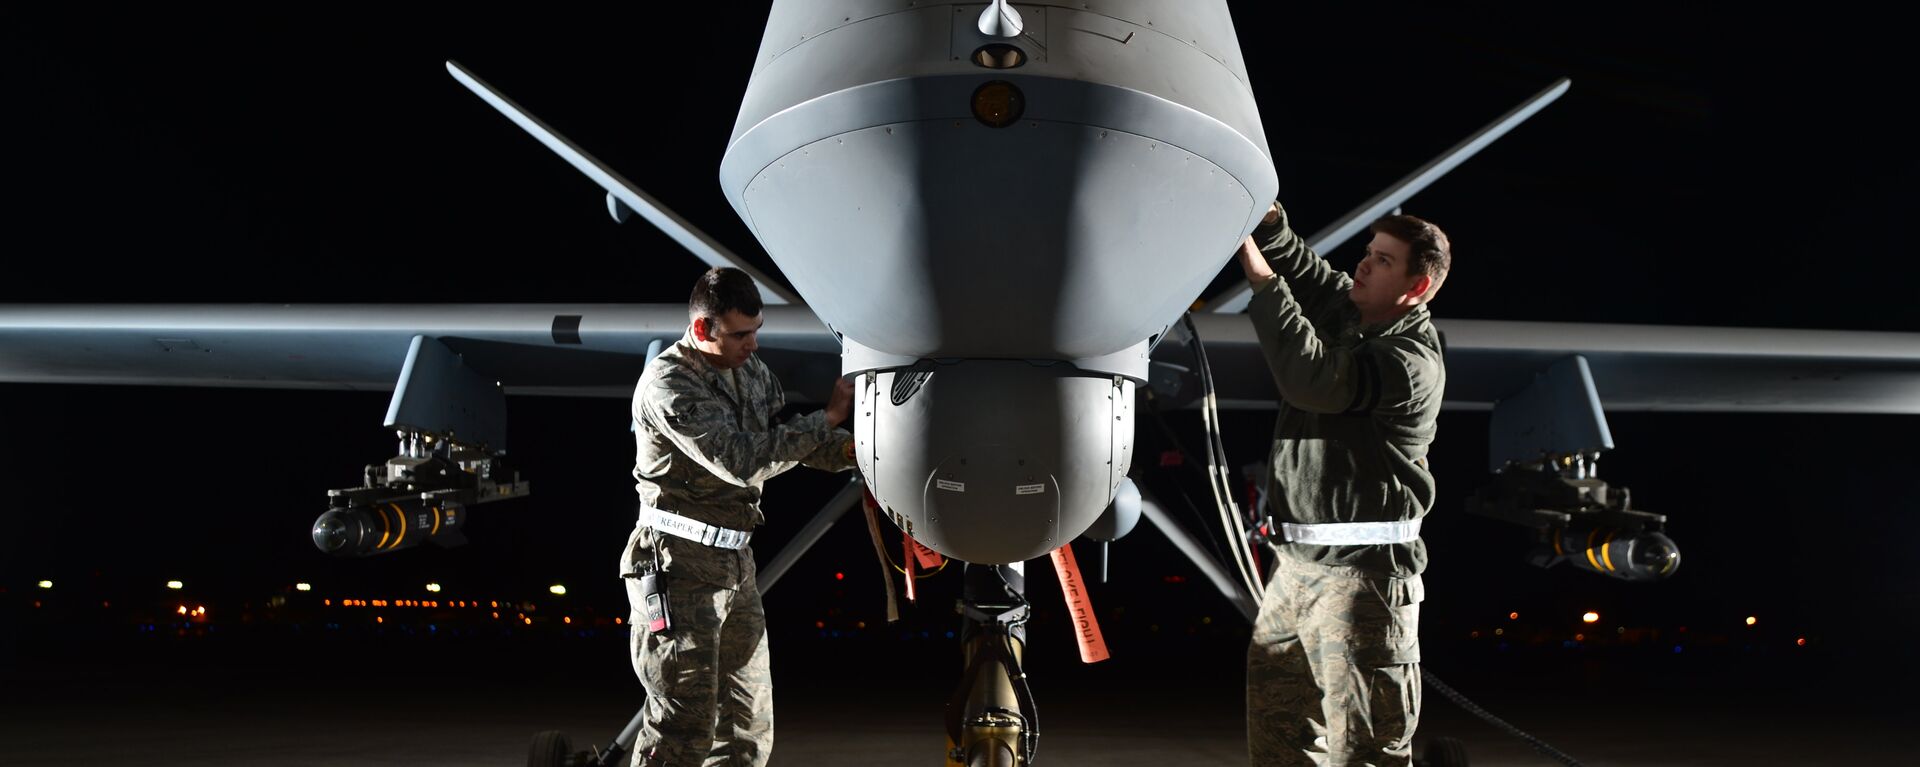 Airman 1st Class Steven (left) and Airman 1st Class Taylor prepare an MQ-9 Reaper for flight during exercise Combat Hammer, May 15, 2014, at Creech Air Force Base, Nev. Reaper crews flew a week-long mission, where they released the GBU-12 Paveway II and AGM-114 Hellfire munitions. Steven and Taylor are MQ-9 Reaper crew chiefs from the 432nd Aircraft Maintenance Squadron.  - Sputnik International, 1920, 15.03.2023